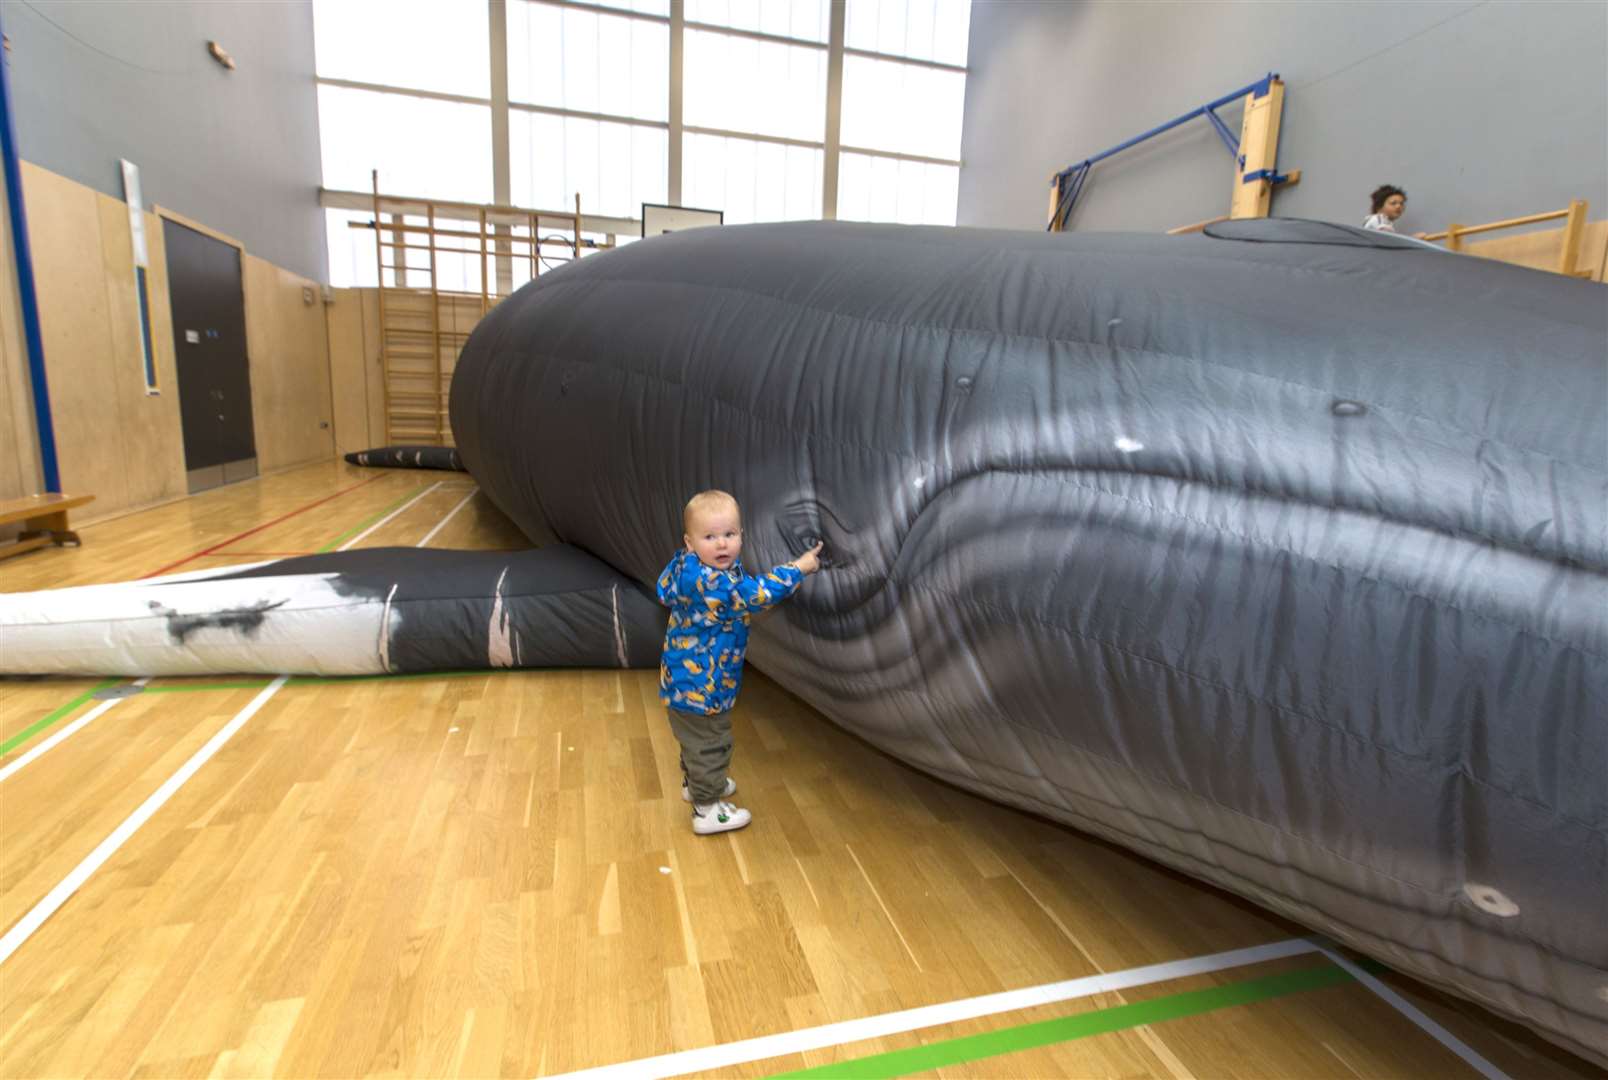 Not many two-year-olds can say they poked a humpback whale in the eye, but that's what Finn Shearer, from Wick, did albeit the whale was a life-size blow-up model on the Whale and Dolphin Conservation stand.Photo: Robert MacDonald/Northern Studios